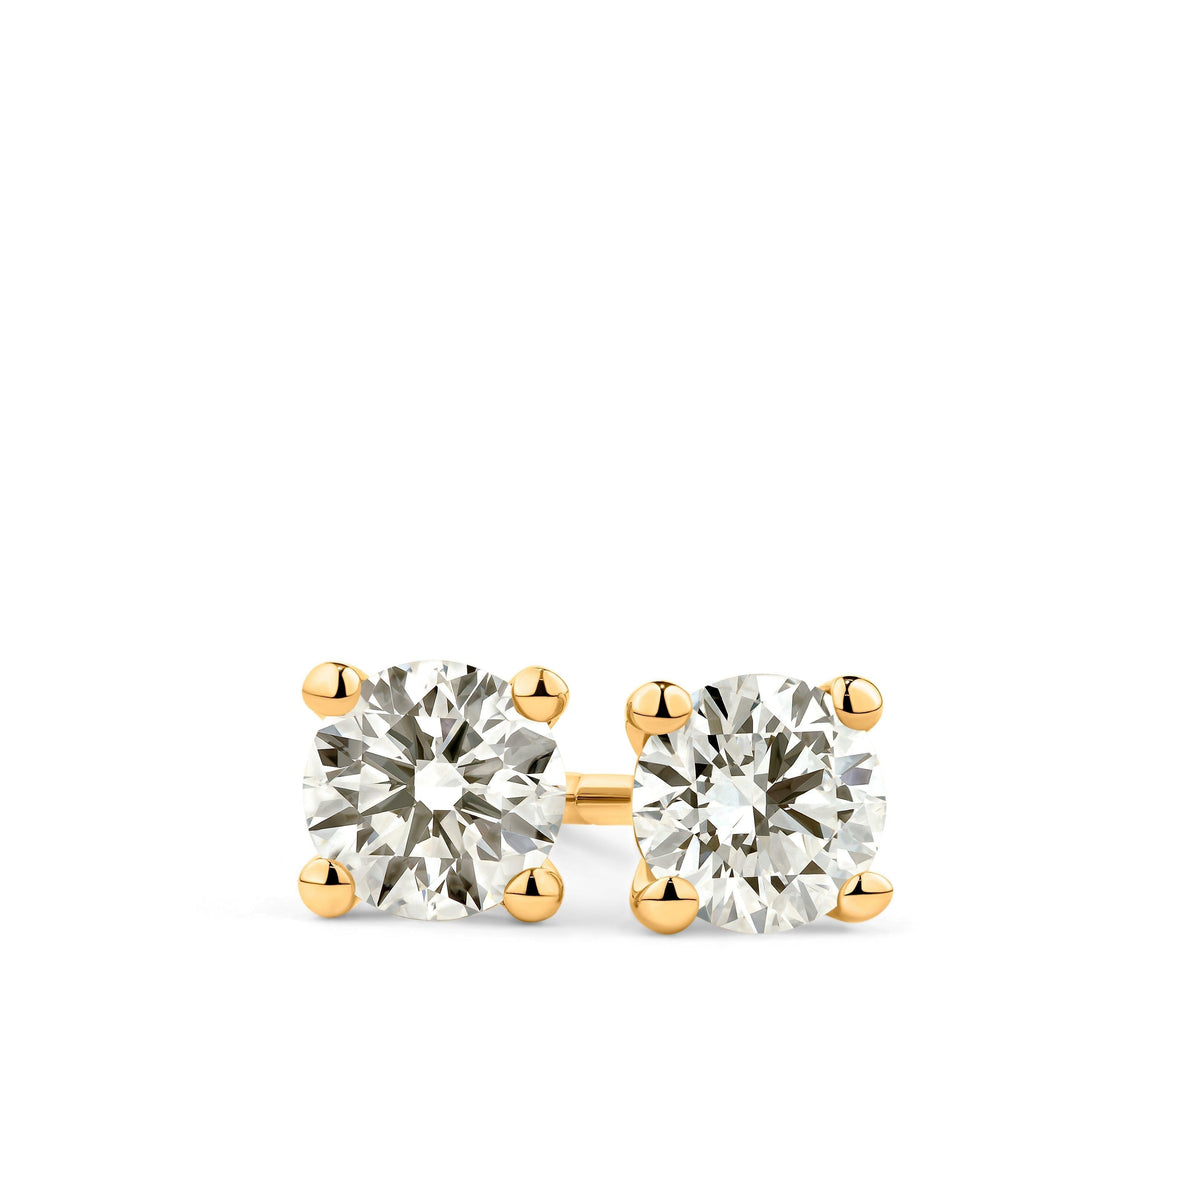 Rendition Solitaire Earrings set in 9ct Yellow Gold - Wallace Bishop